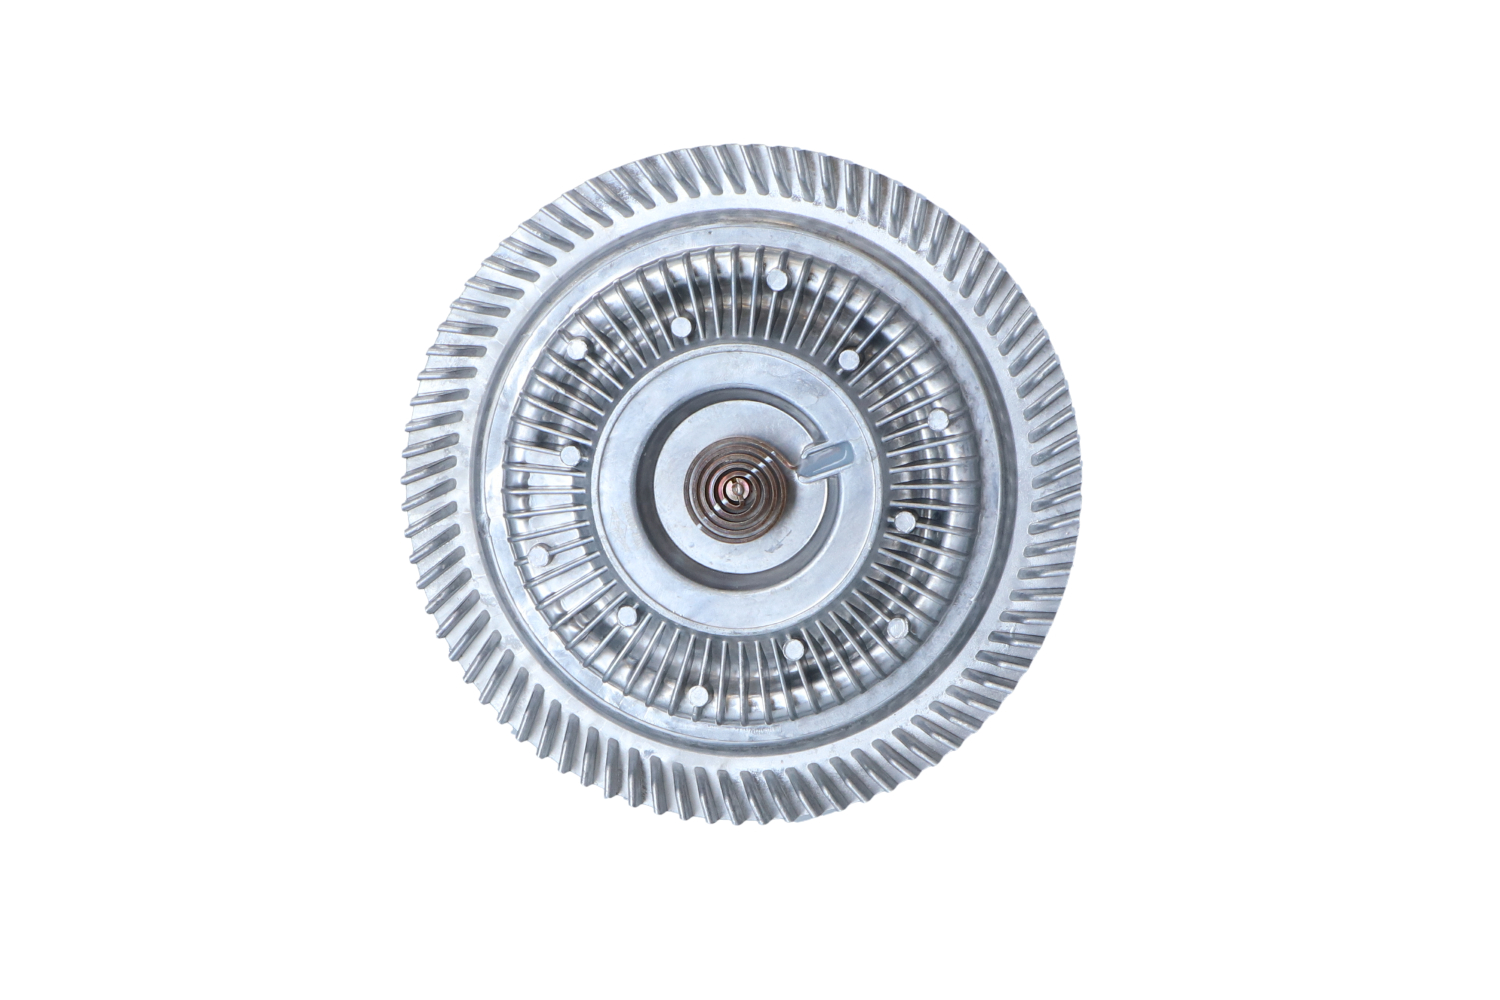 Original 49577 NRF Fan clutch experience and price